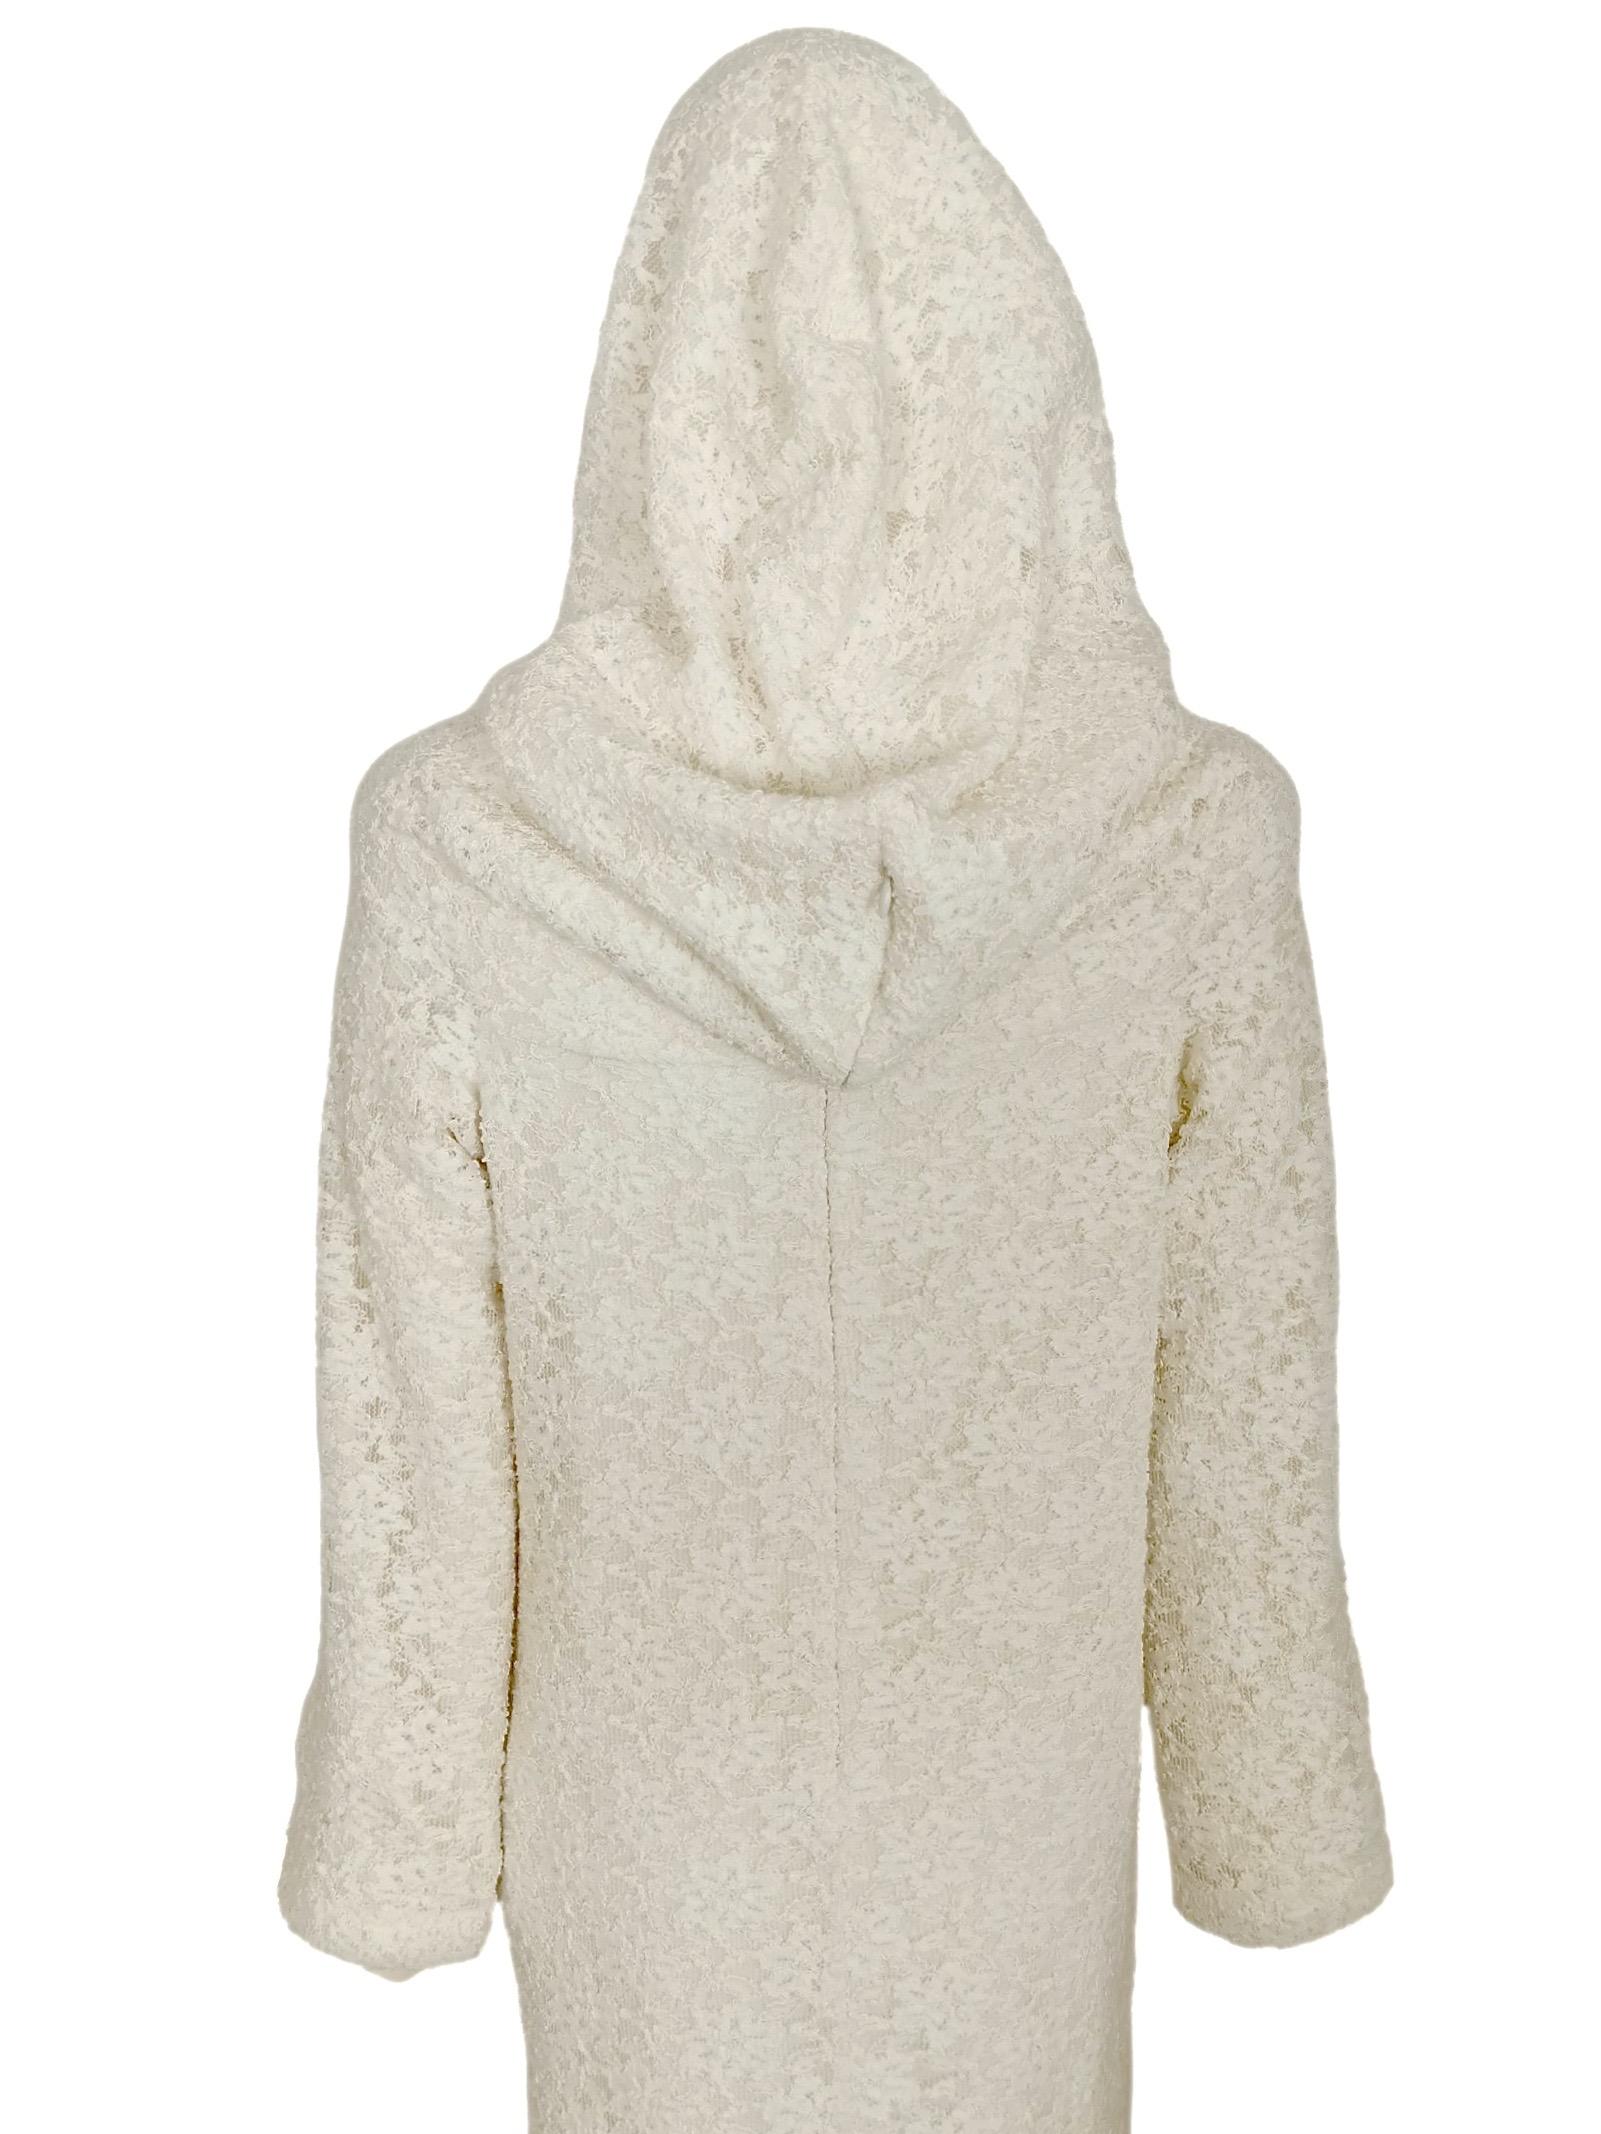 Comme Des Garcons White Drama Cowl Hooded Dress AD 2011 For Sale 10